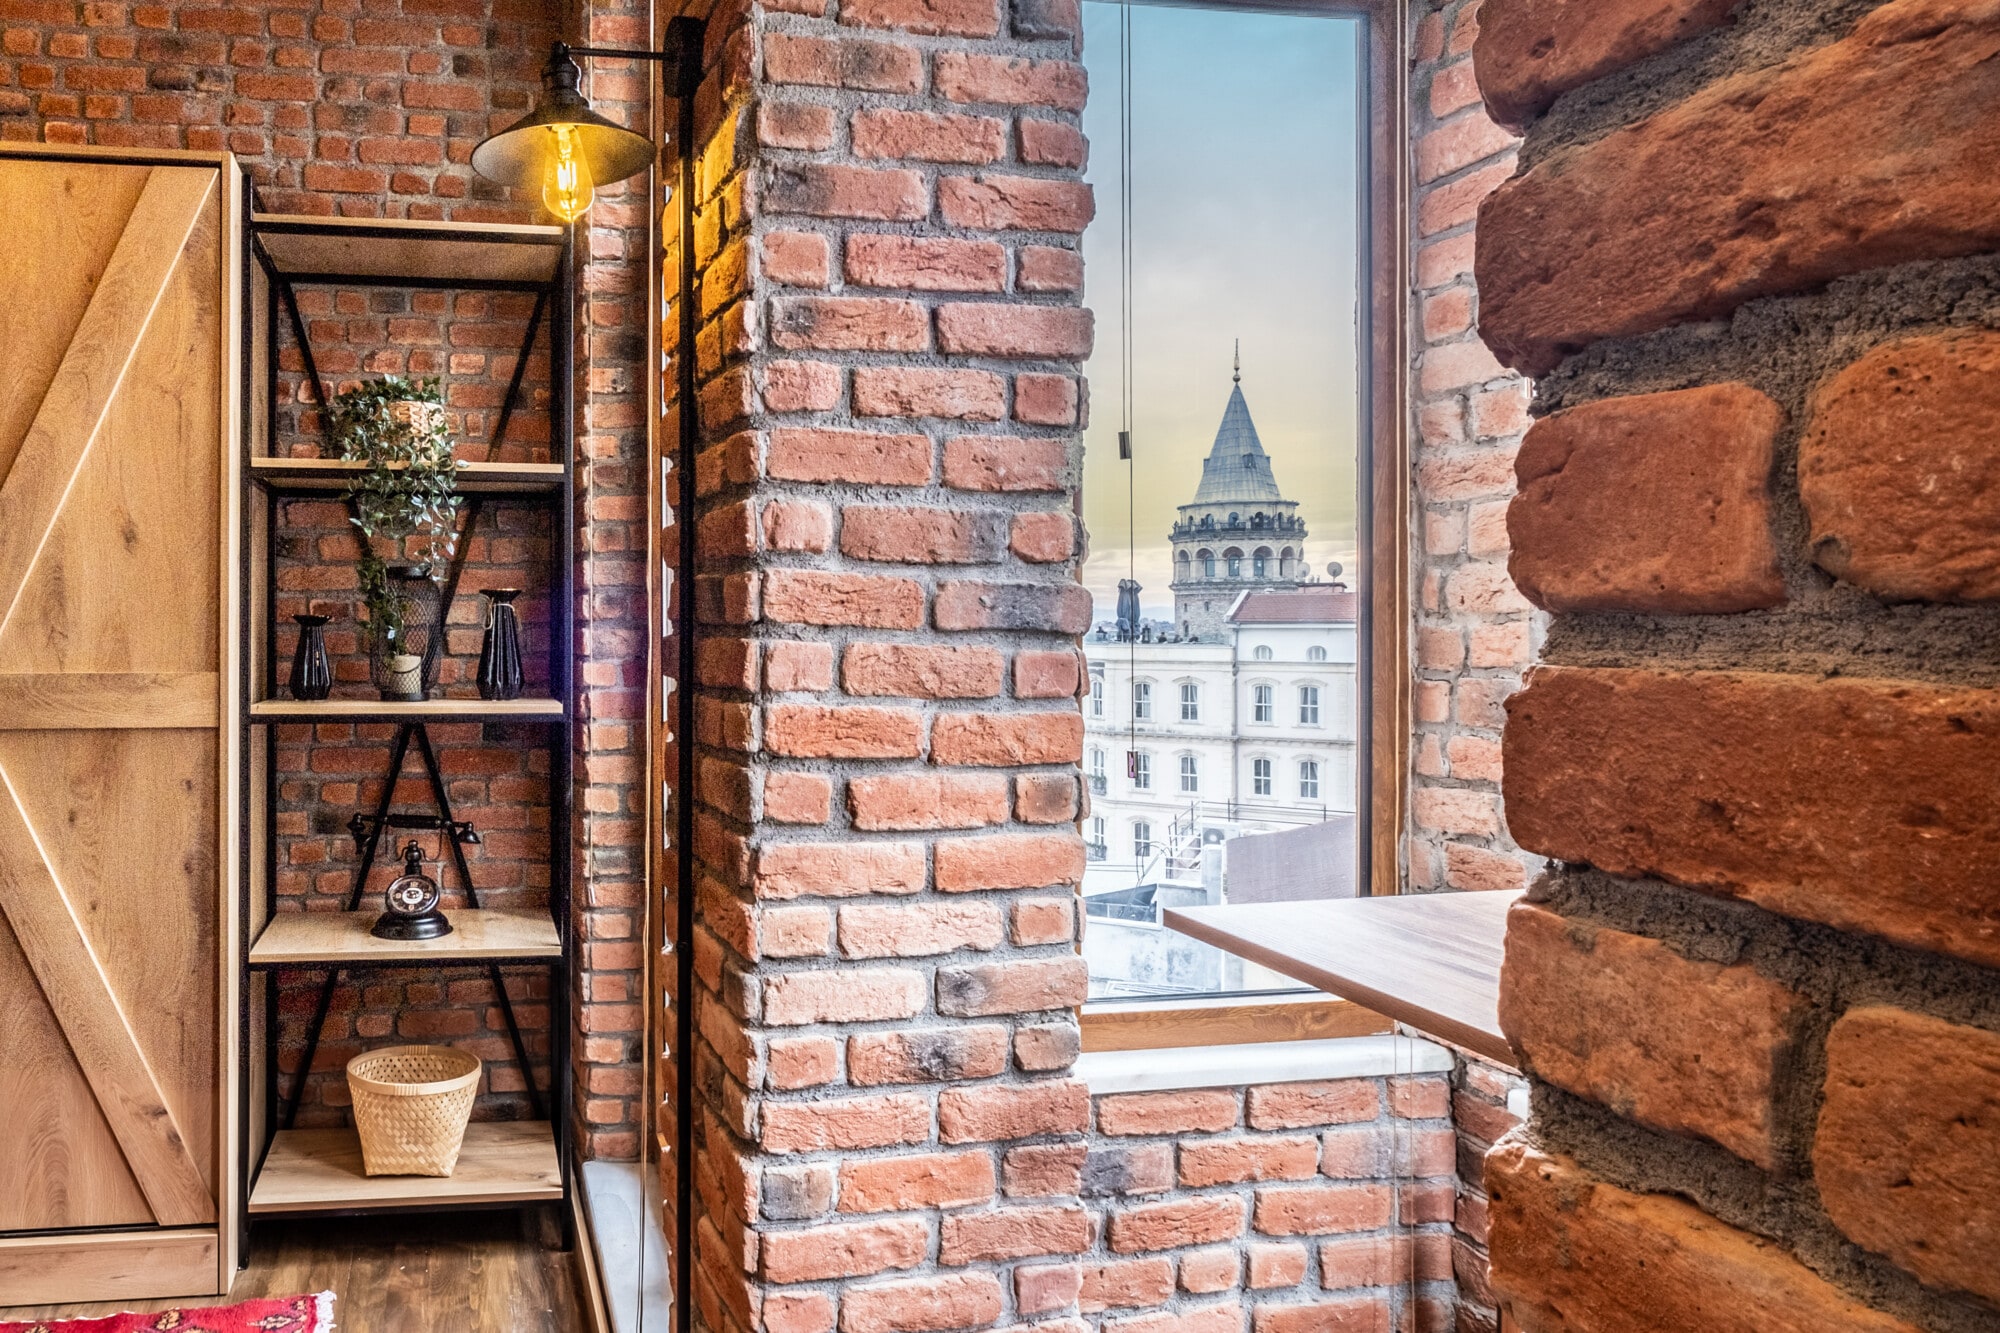 Our captivating flat is ready to host you during your Beyoglu stay.